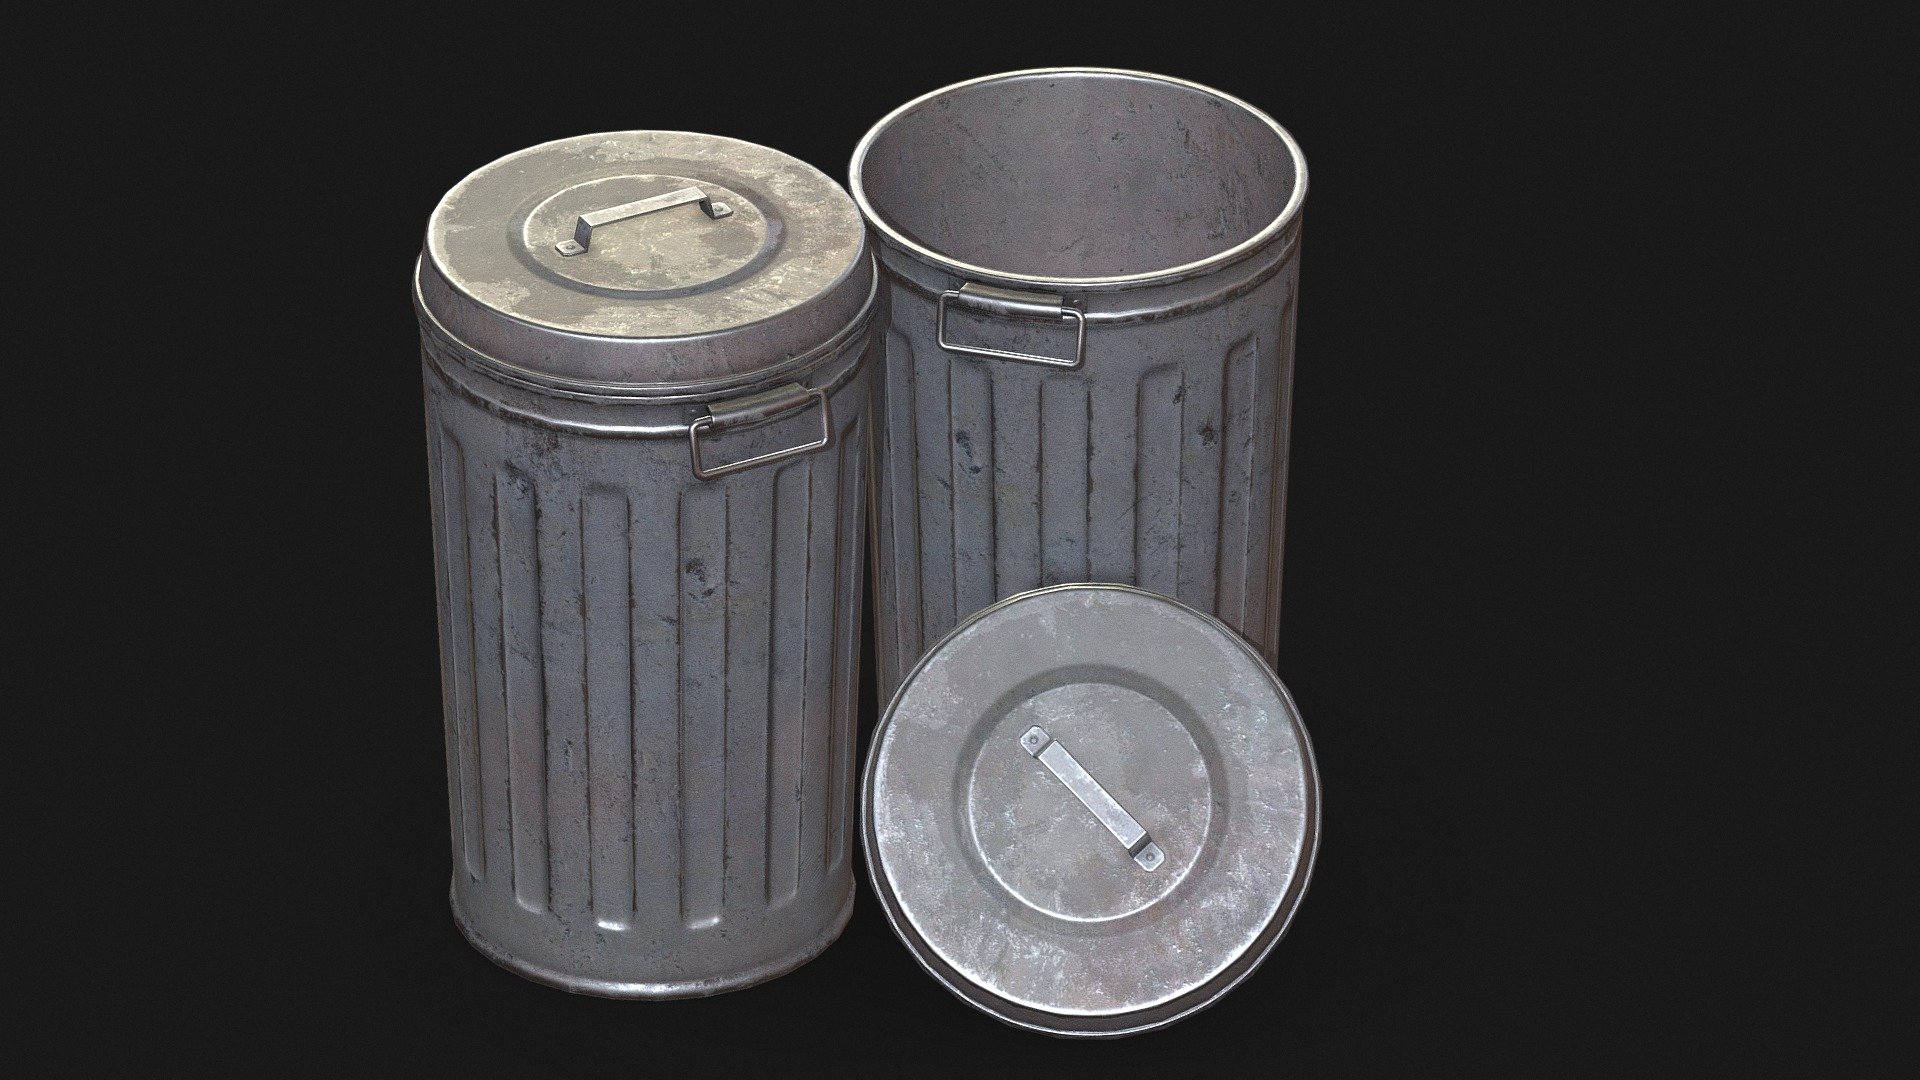 low-poly 3d model ready for Virtual Reality (VR), Augmented Reality (AR), games and other real-time apps. Trashcan is lowpoly, gameready prop 3d model for game or other project with pbr maps Polygons total - 898

Textures - png - 2048x2048pxl - Trashcans - 3D model by Evgenii Sobolev (@ESobolev) 3d model